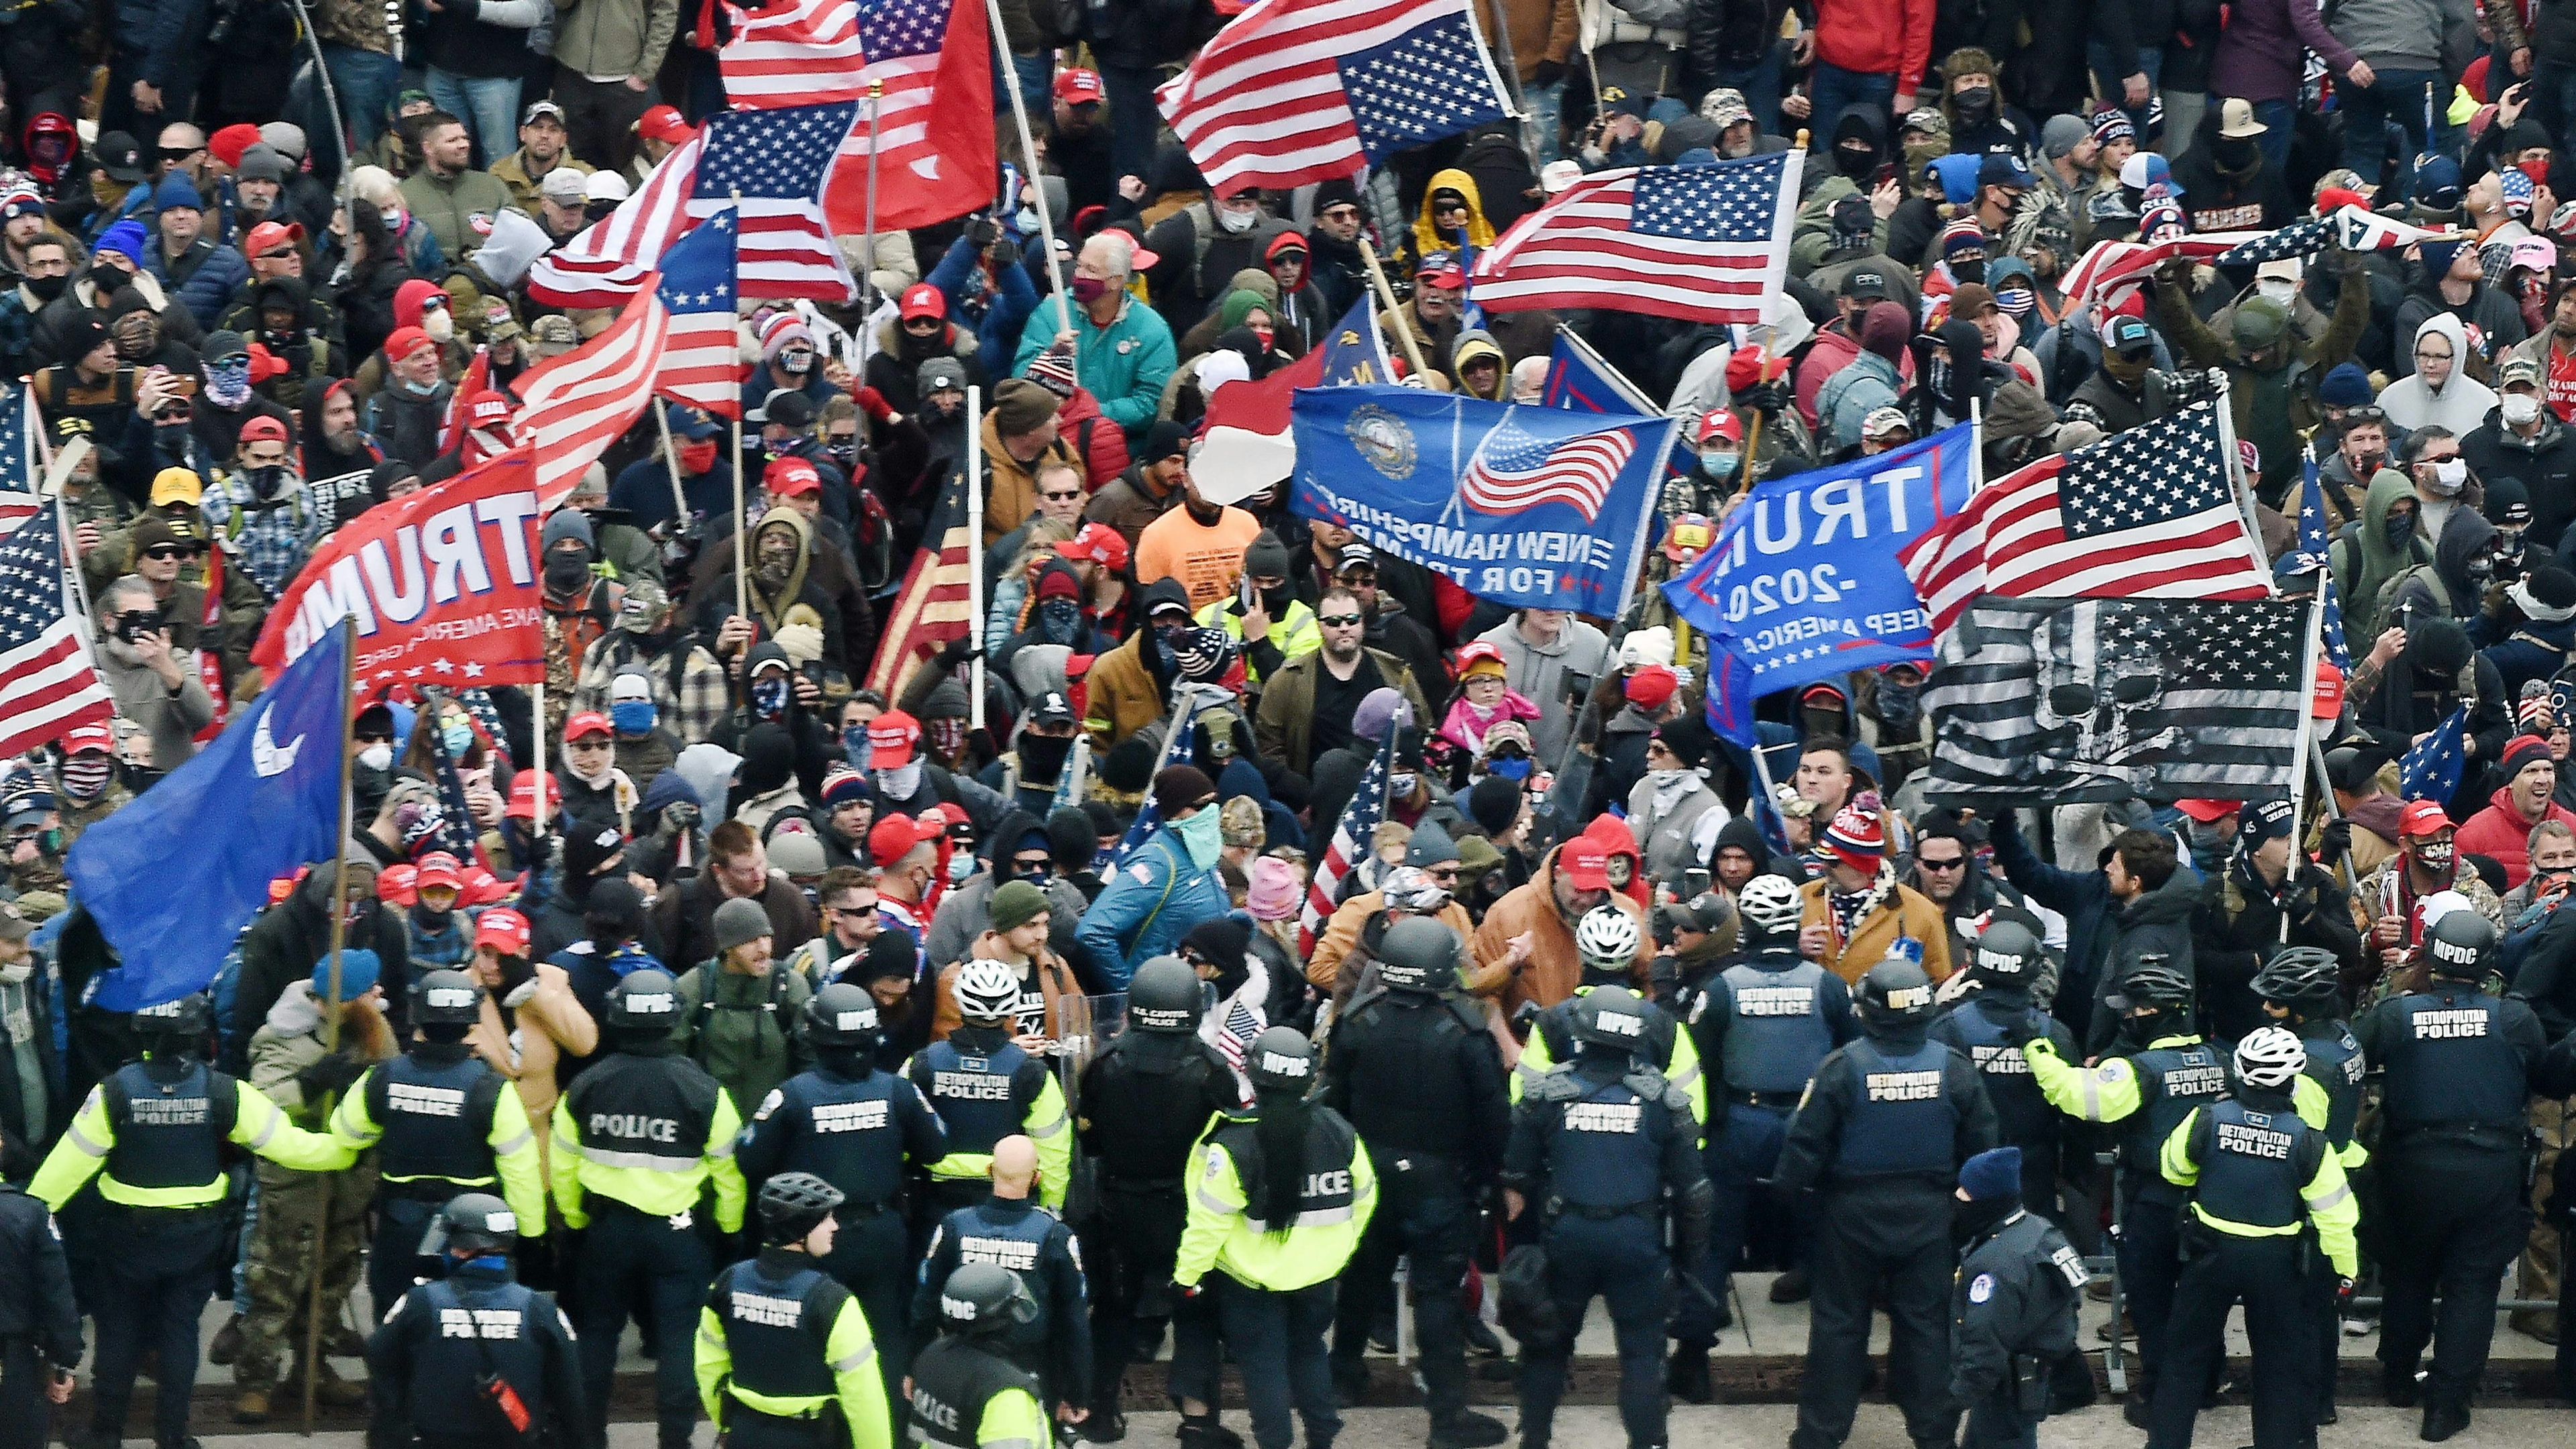 Trump supporters clash with police and security forces as they storm the US Capitol in Washington, DC on January 6, 2021.